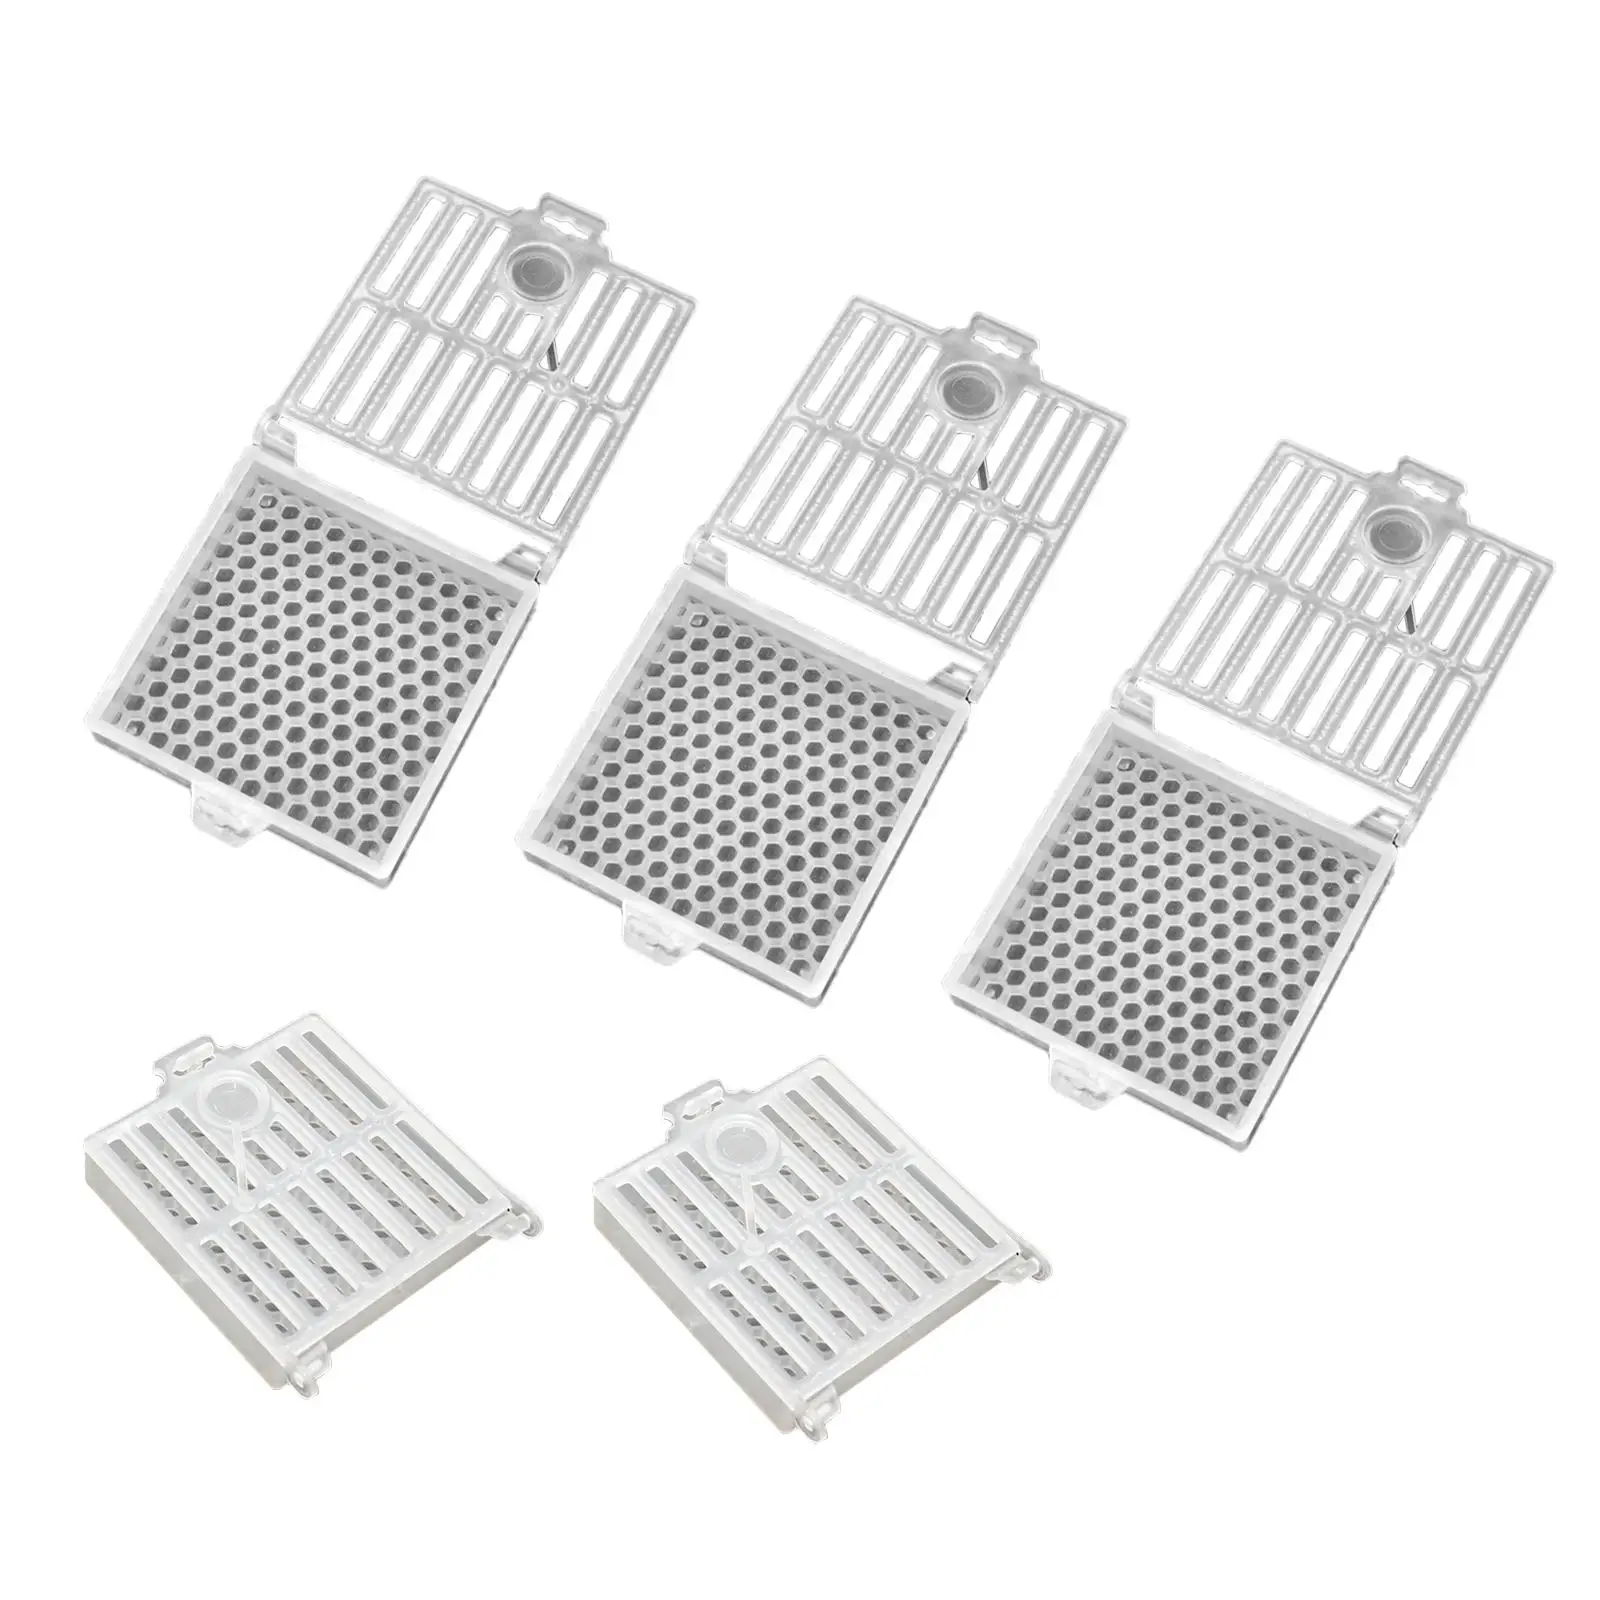 5x Queen Post Cage Clear House Multifunction with Comb